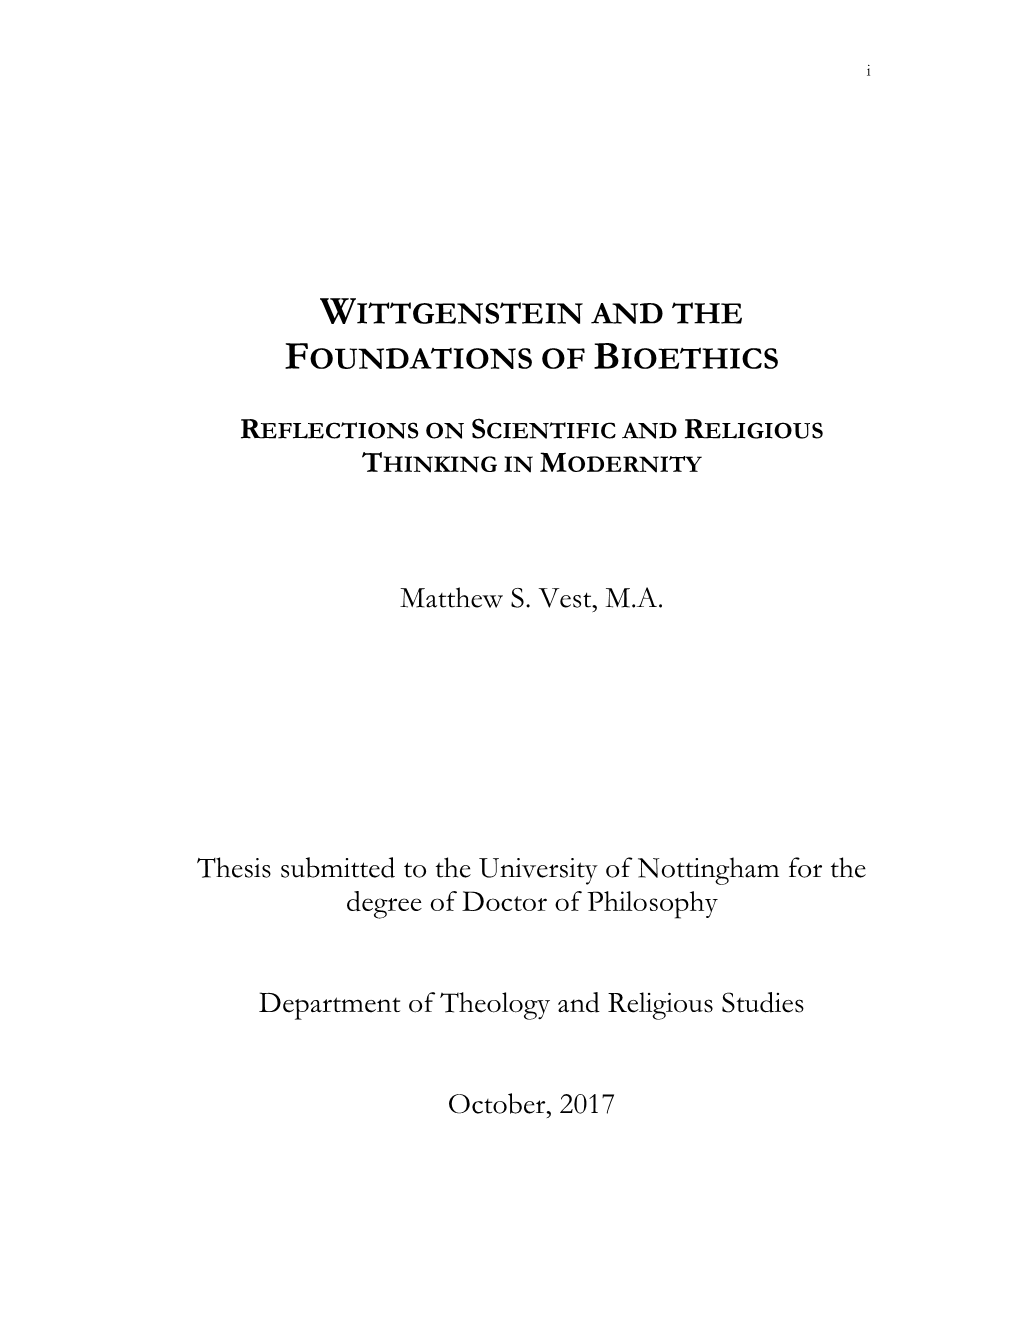 Wittgenstein and the Foundations of Bioethics